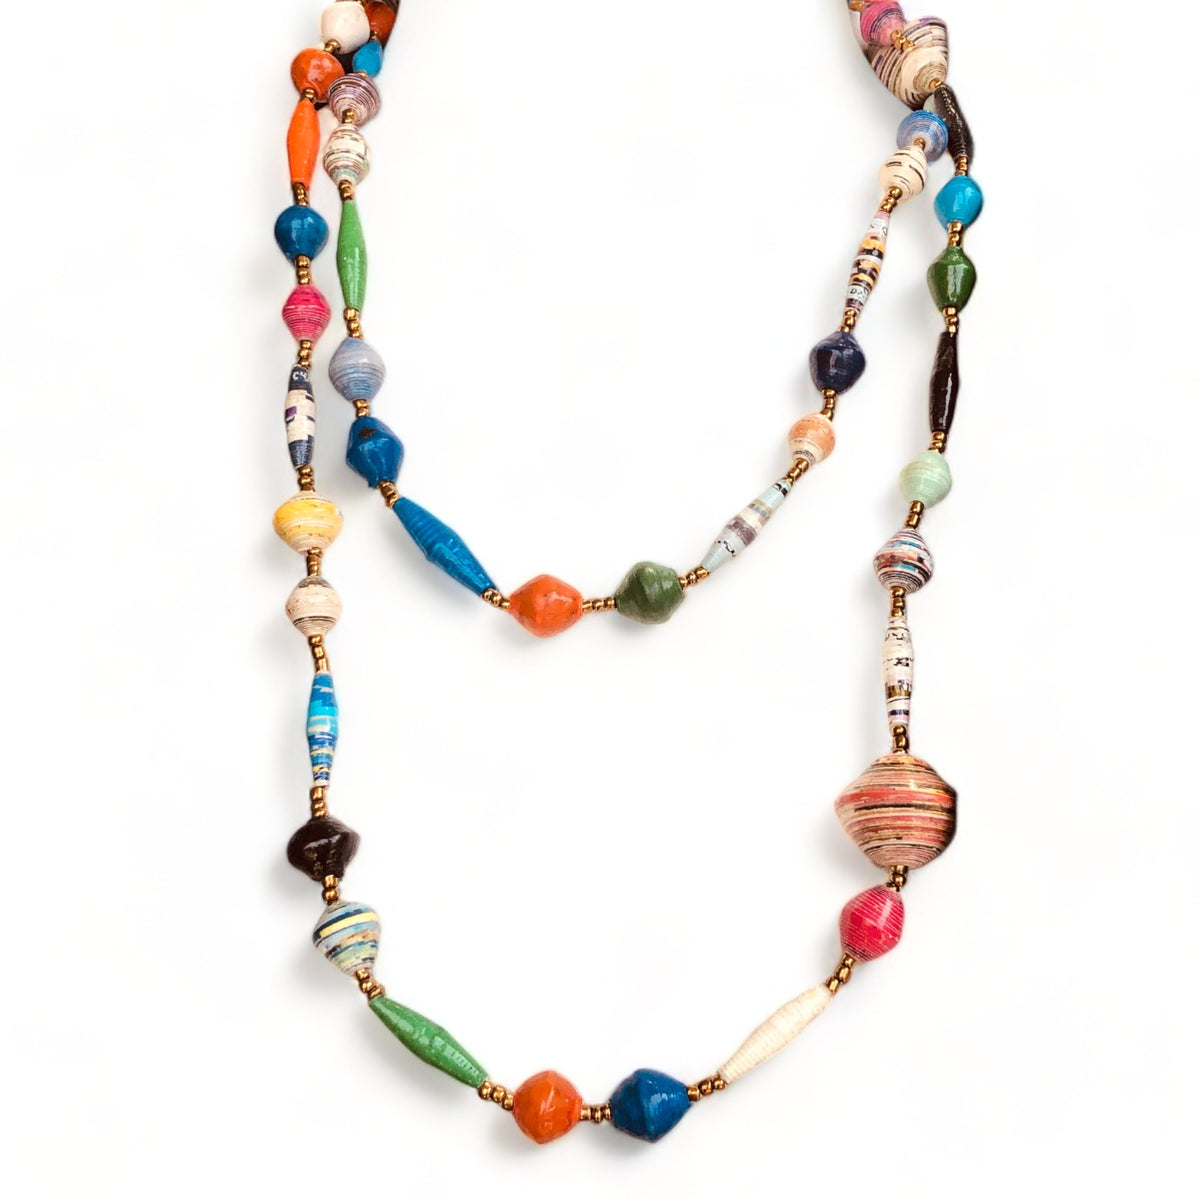 Fiesta 3 Handmade Beaded Long Necklace (Multicolor with Gold Seed Beads)